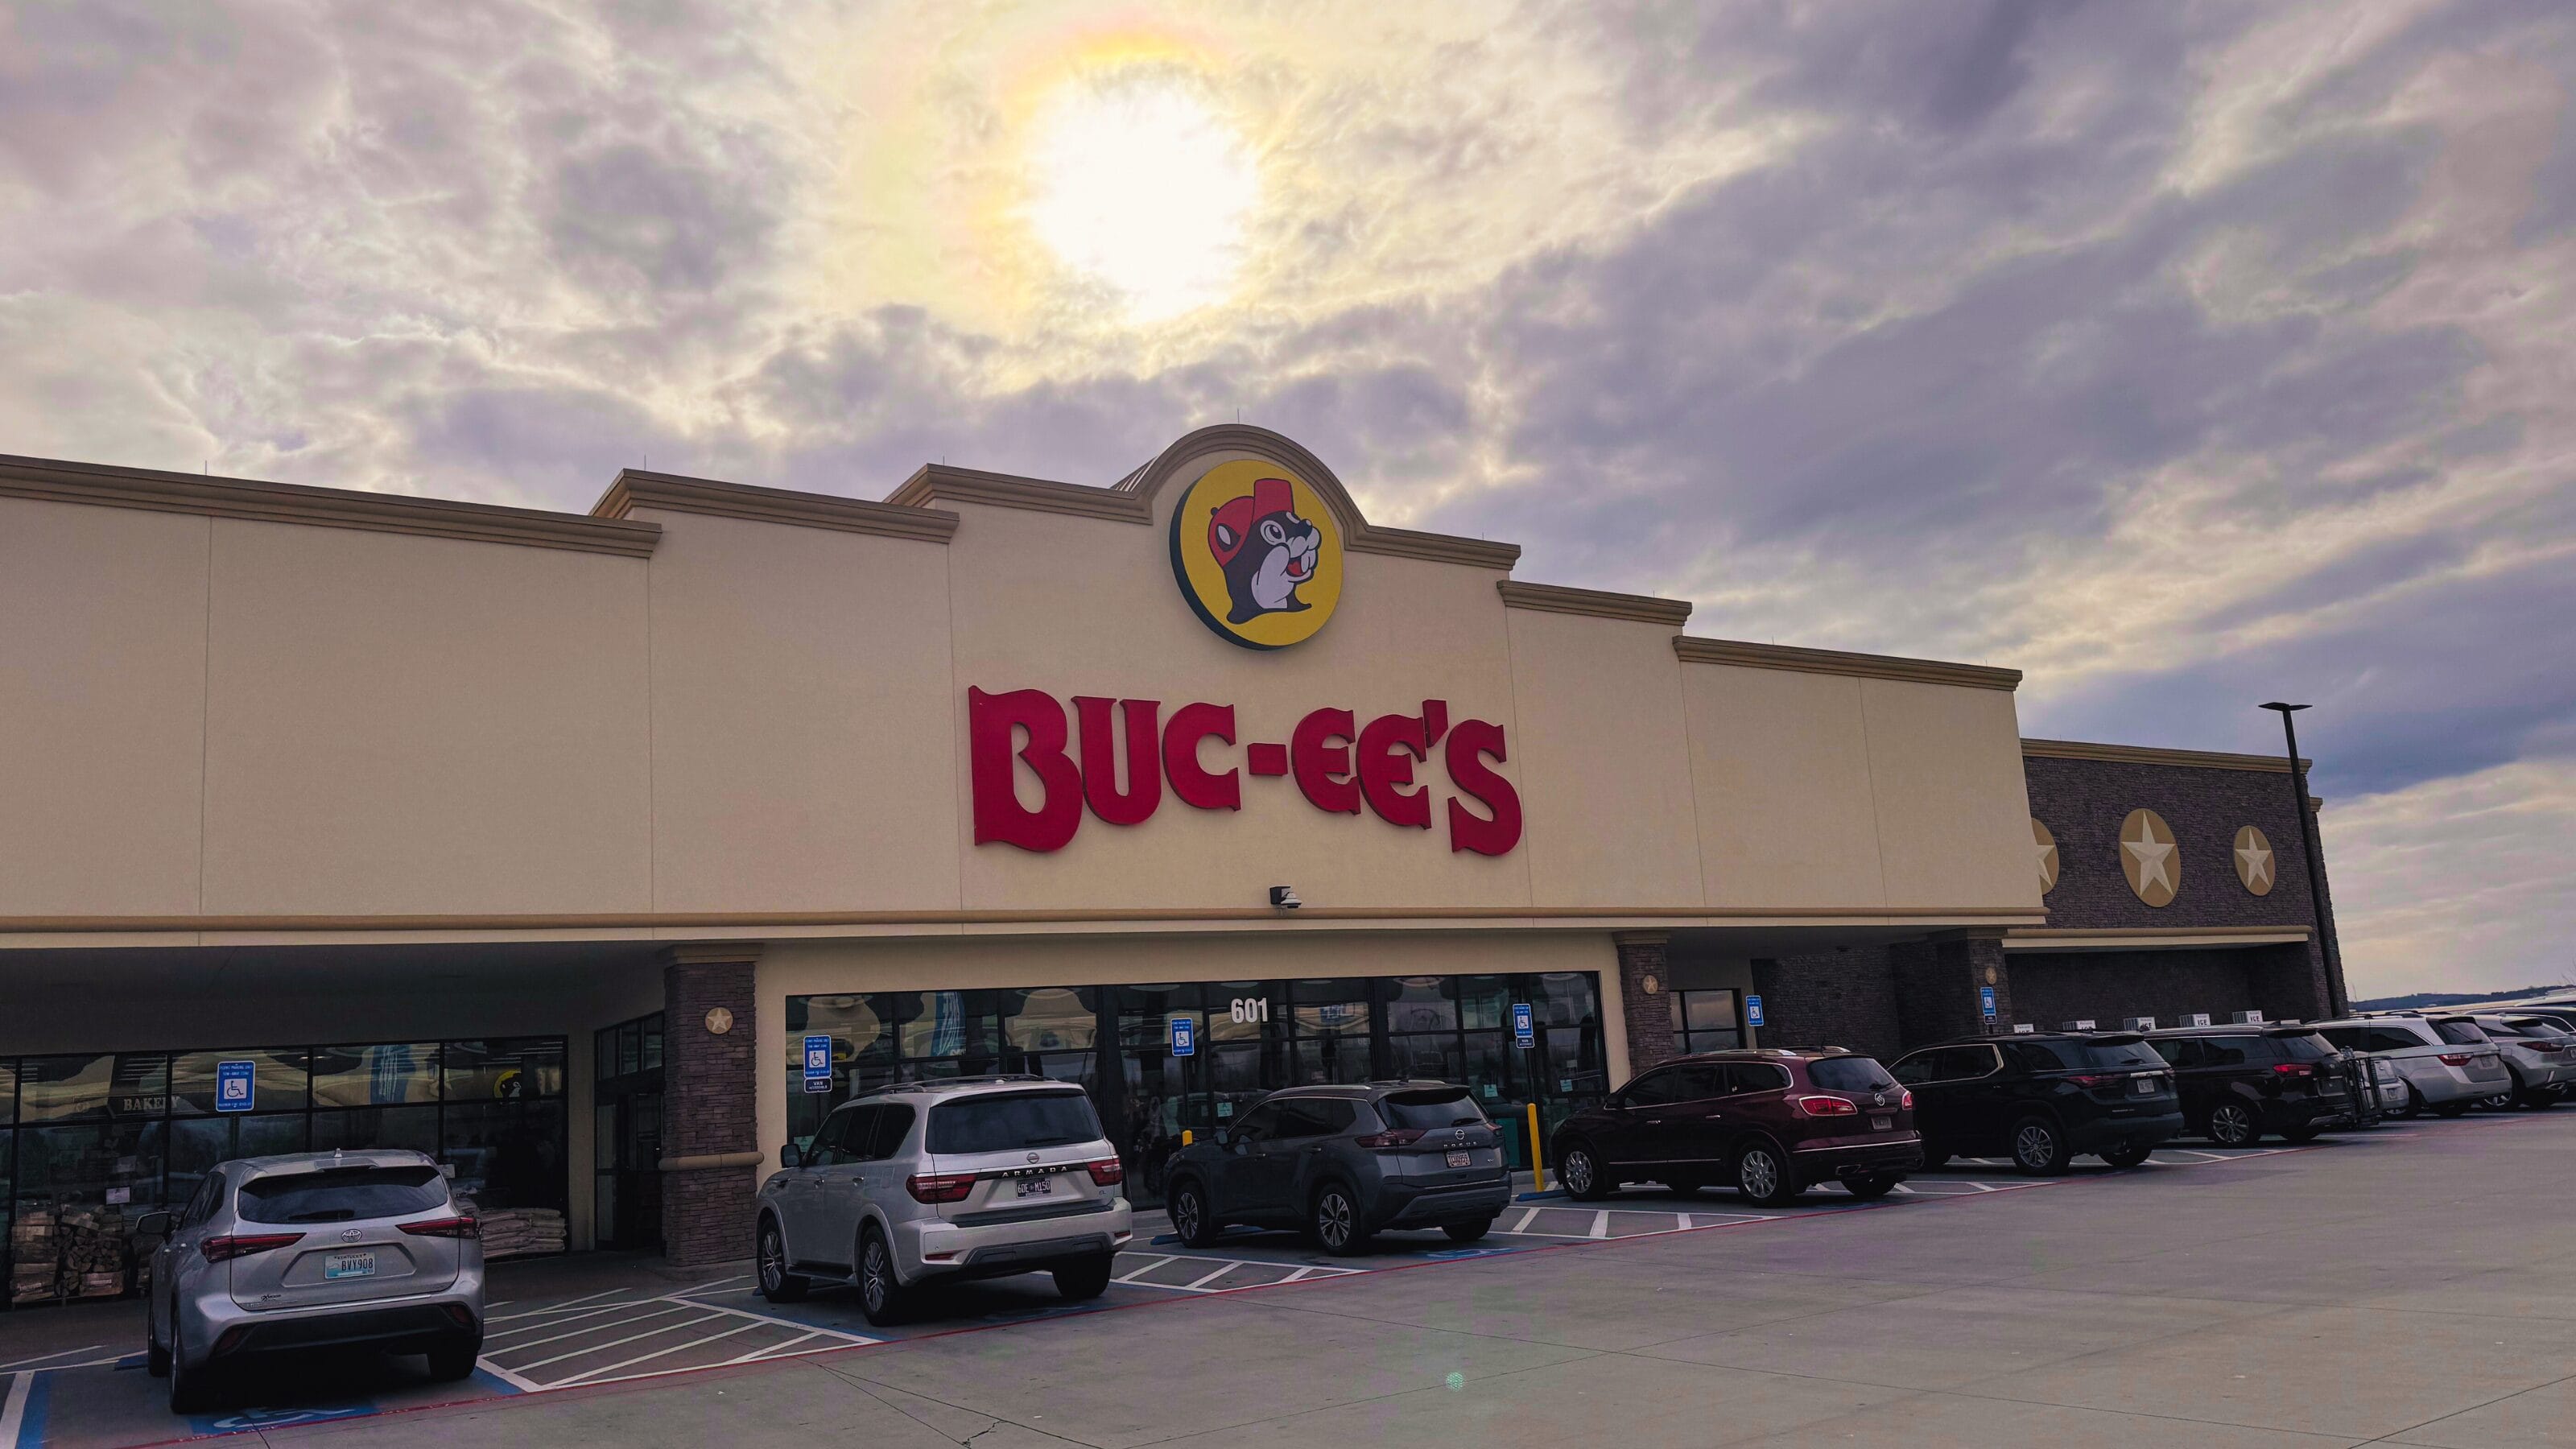 <p>If Costco and Cracker Barrel had a baby on the interstate, it would be Buc-ee’s! It’s a larger than life convenience store / gas station with dozens of gas pumps, clothing, and food items. </p> <p>The company started in Texas and is now slowly taking over interstate exits across the southeast. Not only is the gas reasonable and the restrooms squeaky clean, but the road trip snacks are first rate. </p> <p>After multiple road trips and sampling the snacks at various locations across the Southeast, we have a pretty good feel on what the best (or most unique) snacks at Buc-ee’s are. Be sure to give these a try, and let us know what your favorite road trip snacks from Buc-ee’s are.</p>